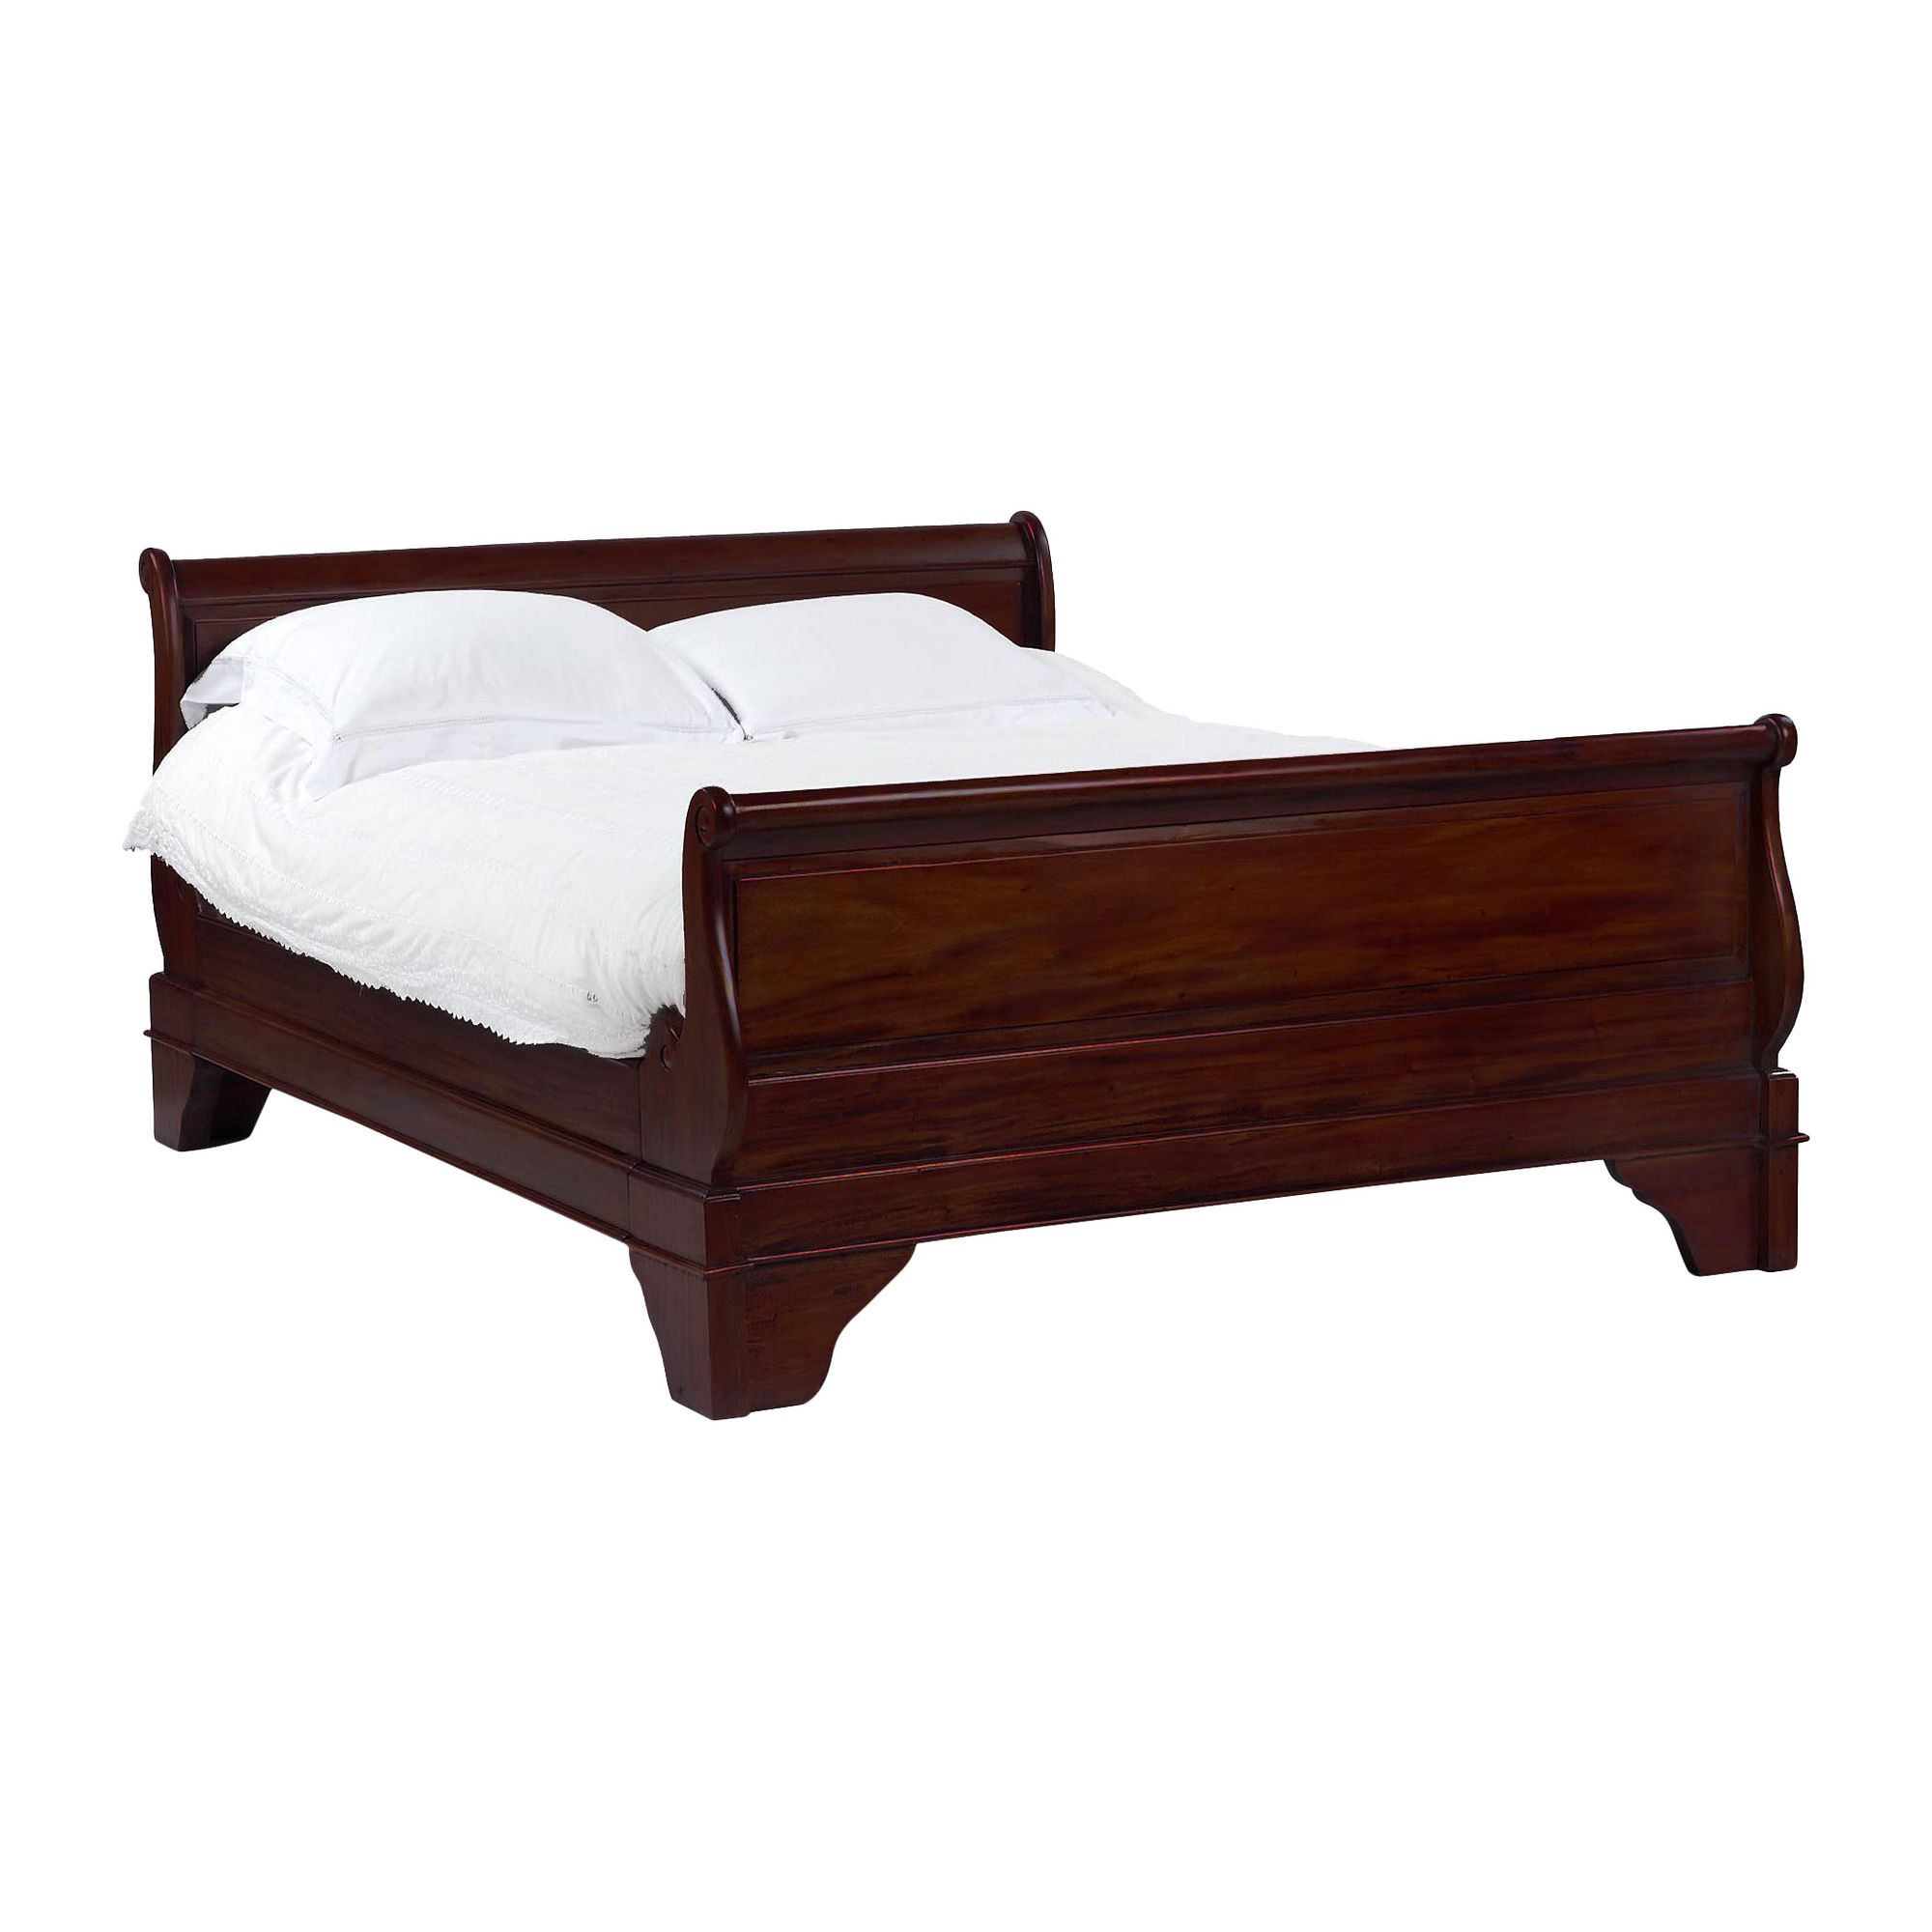 Anderson Bradshaw Colonial French Sleigh Bed Frame - King at Tesco Direct